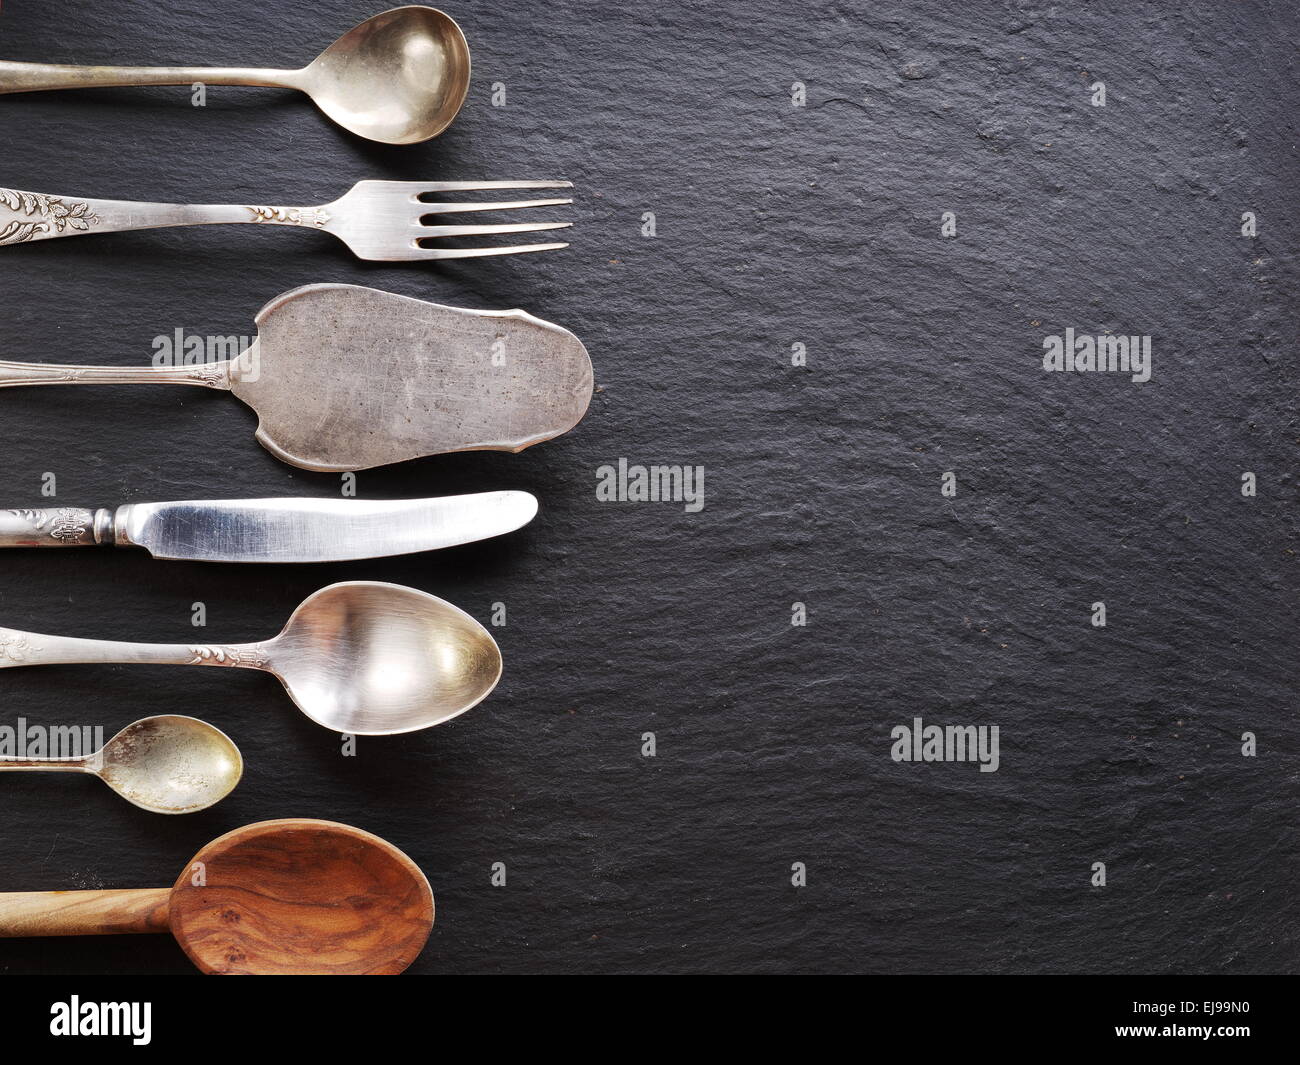 Cooking utensils on a dark gray background. Stock Photo